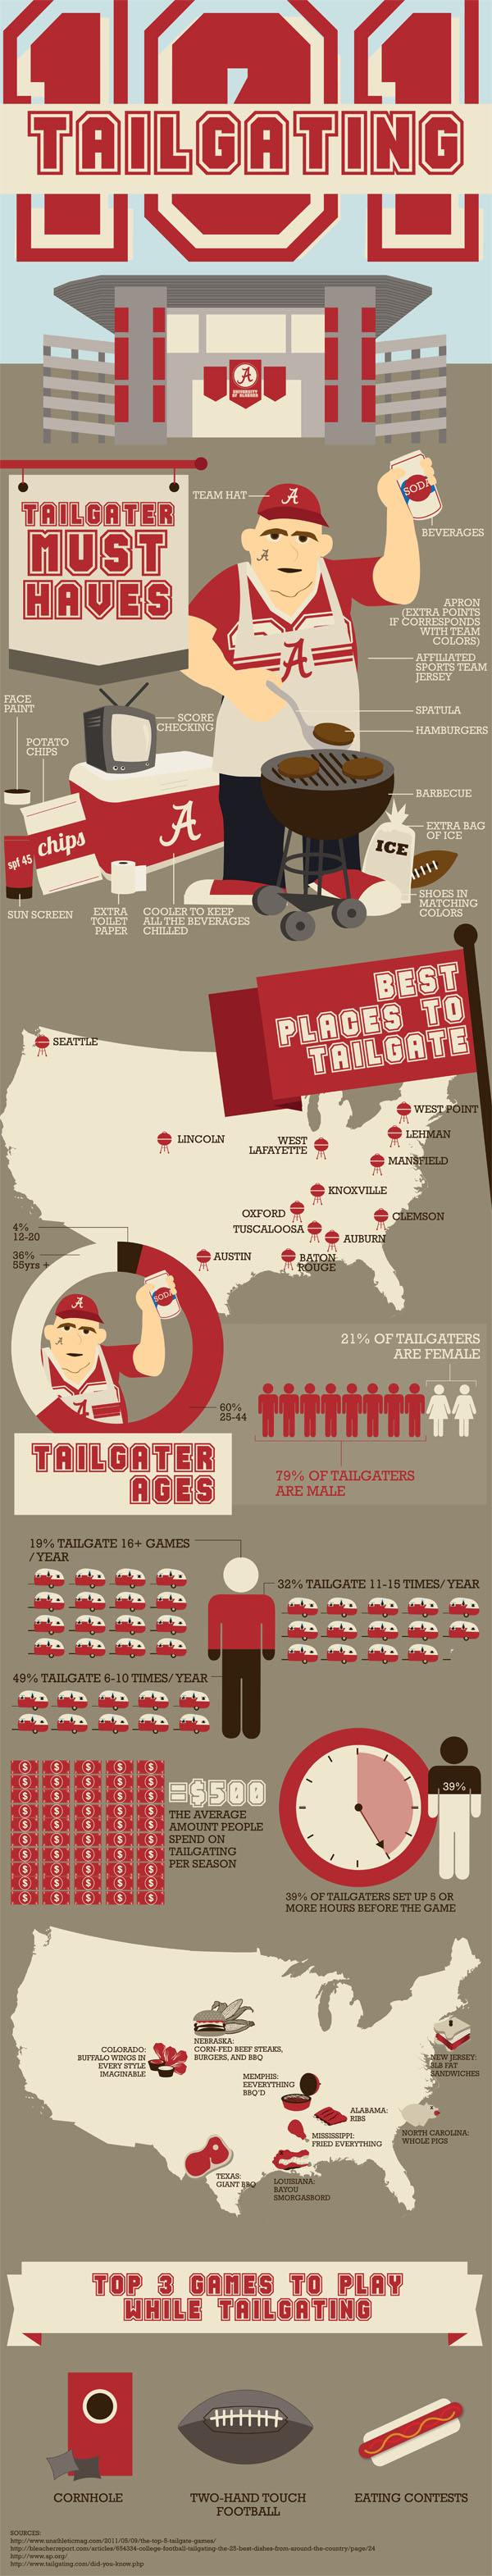 Tailgating 101: College Tailgating Must Haves [INFOGRAPHIC]